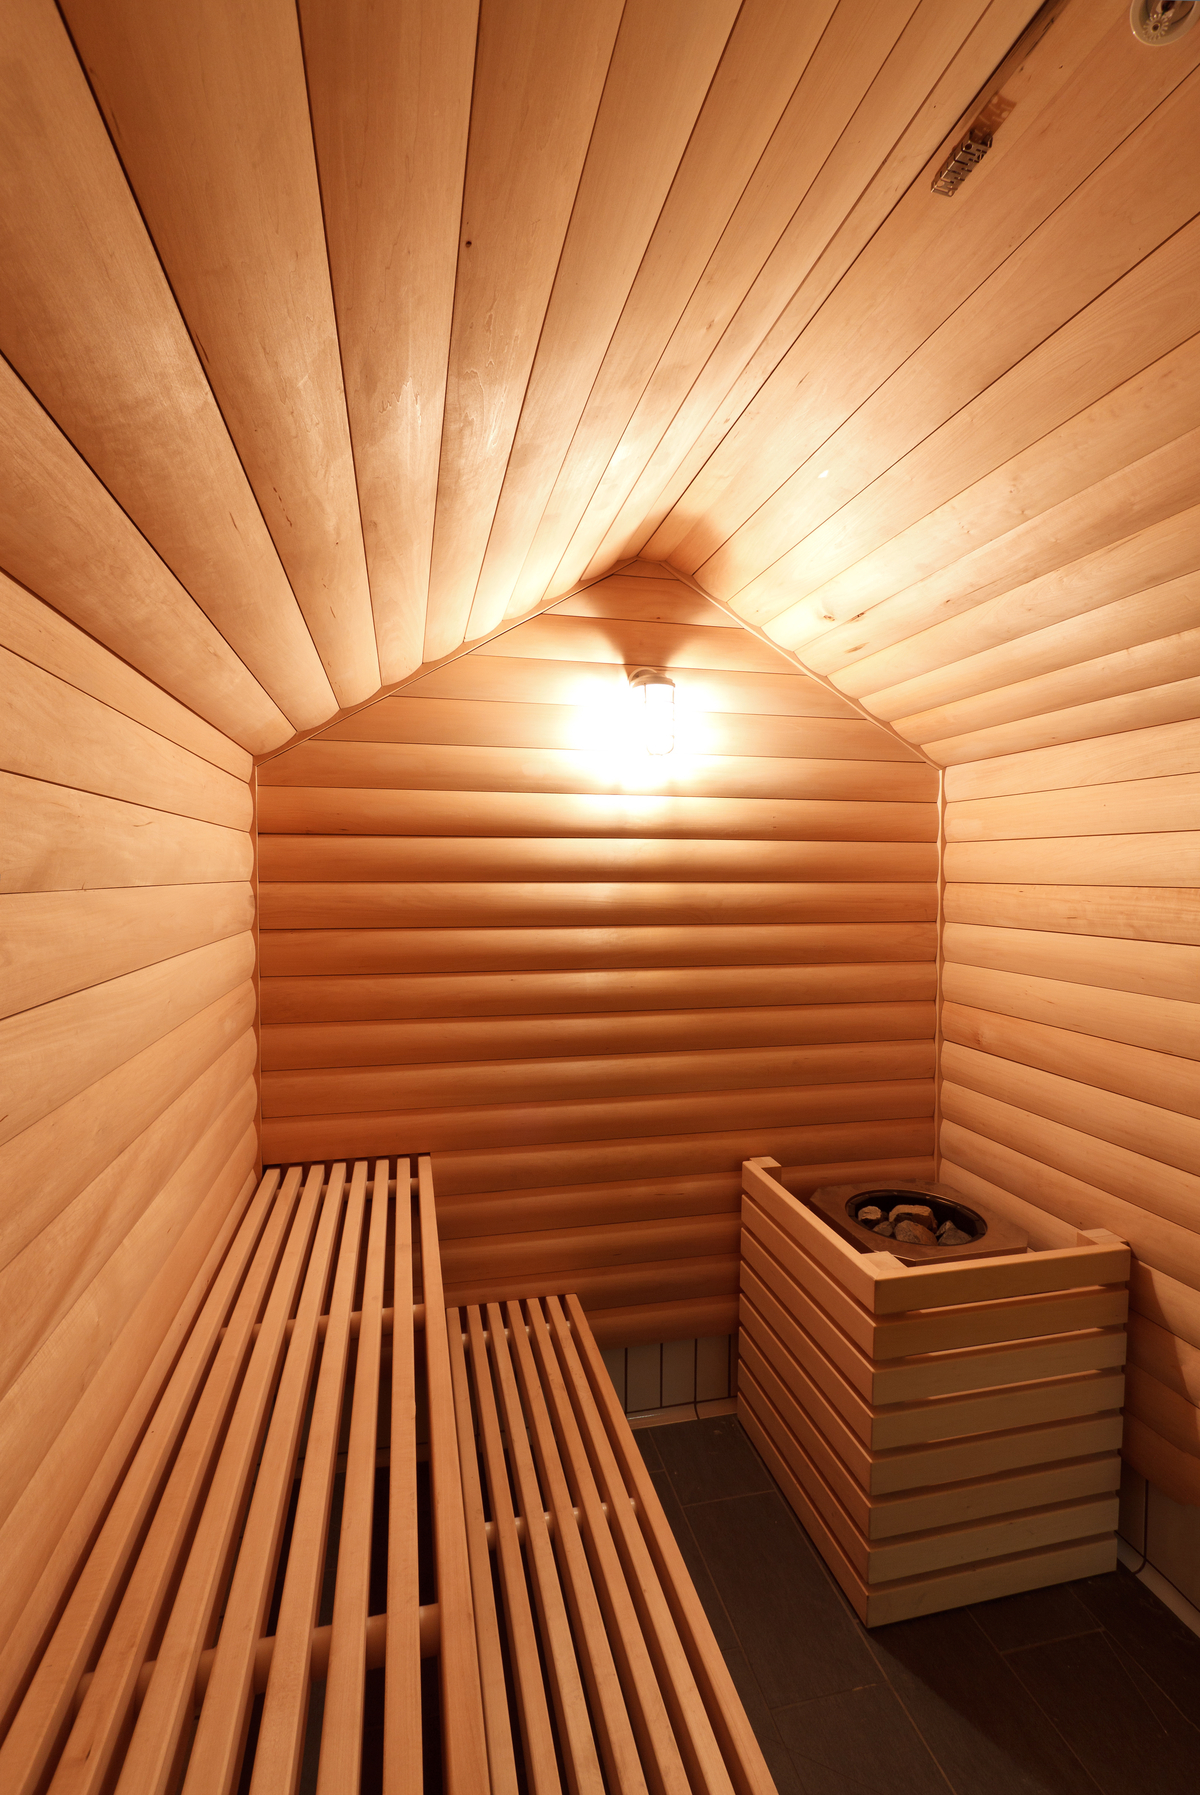 Interior view of Penticton Community Centre Sauna, showing wood paneling, wood seats, wood ceiling, and wood trim